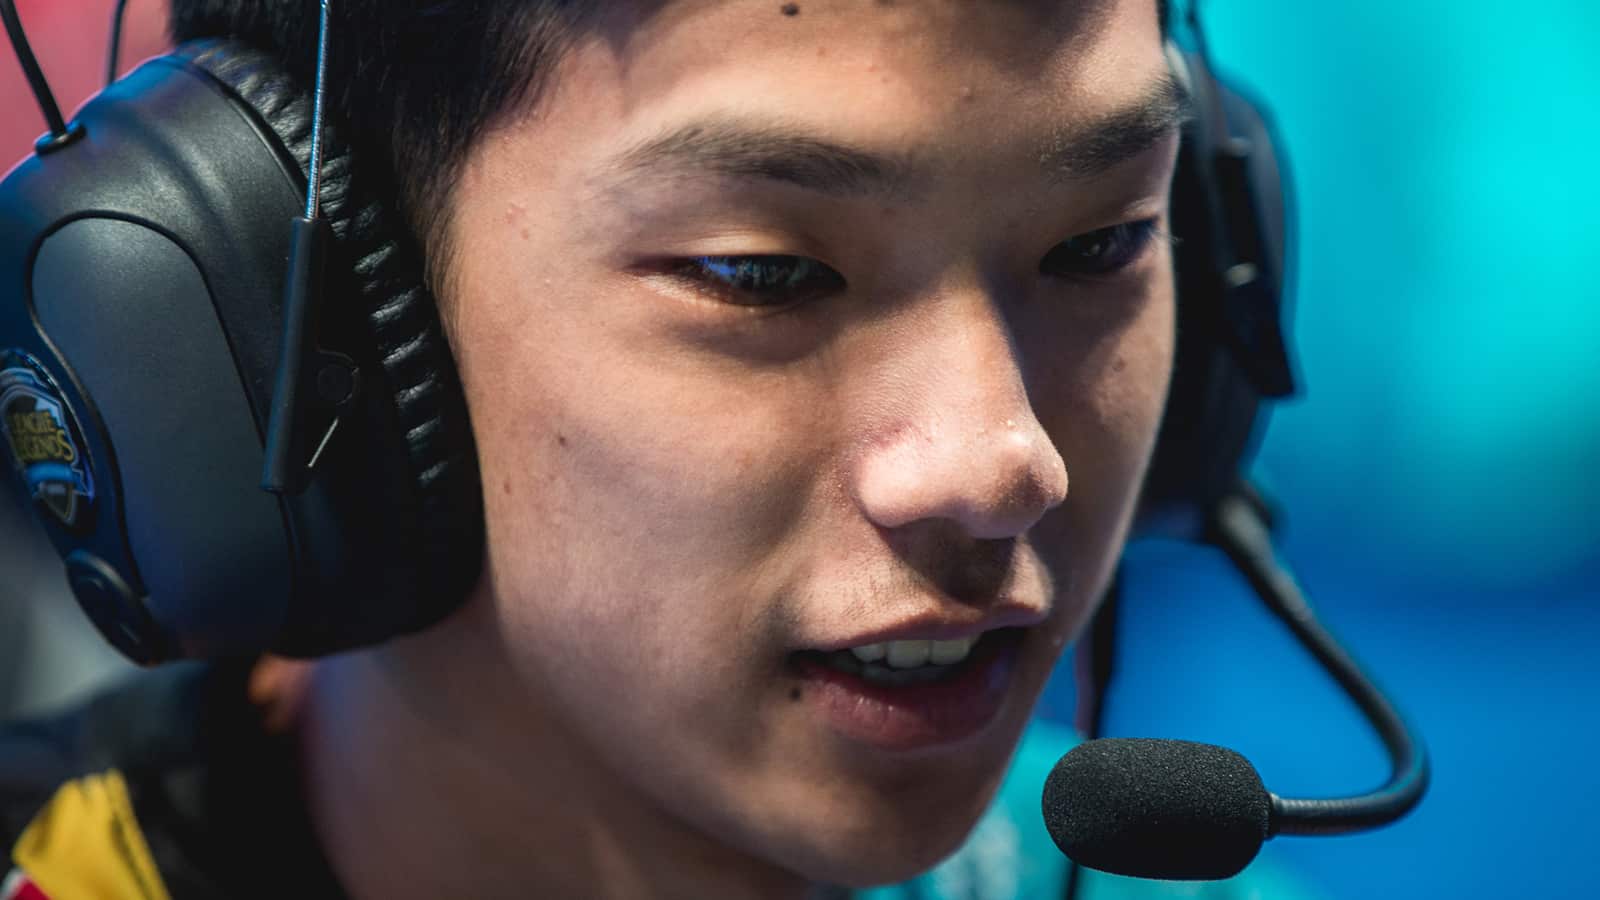 Cloud9 Blaber eager to play at MSI after winning LCS Mid-Season Showdown.